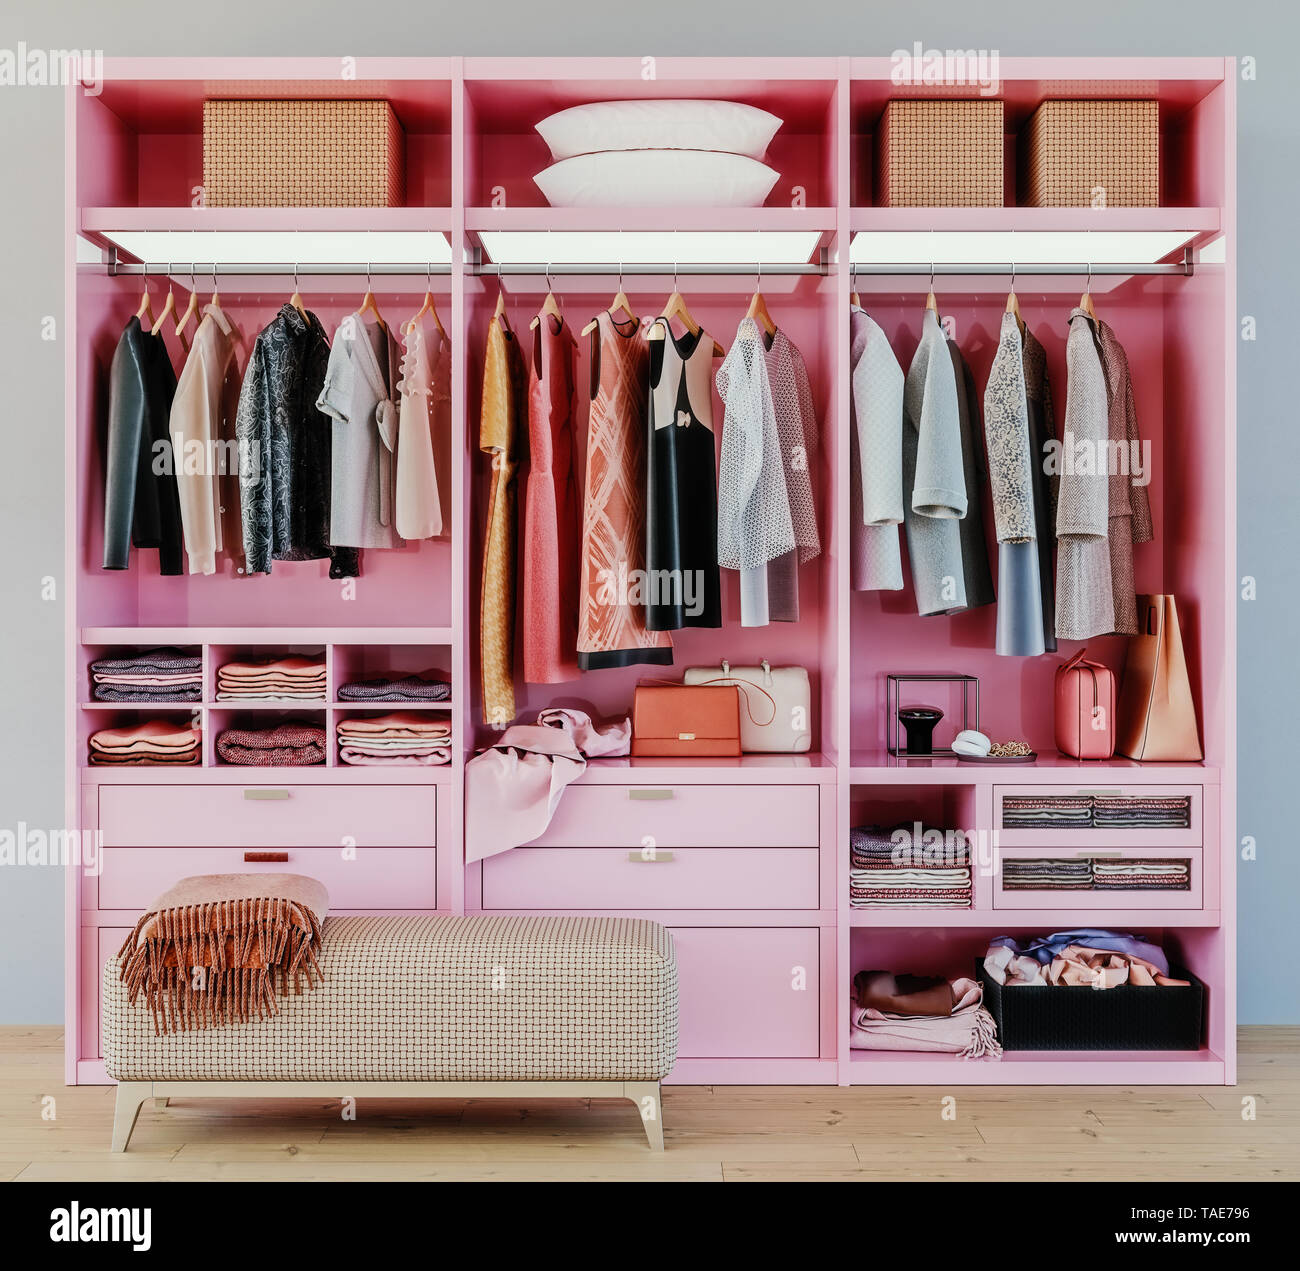 modern pink wardrobe with clothes hanging on rail in walk in closet design interior, 3d rendering Stock Photo